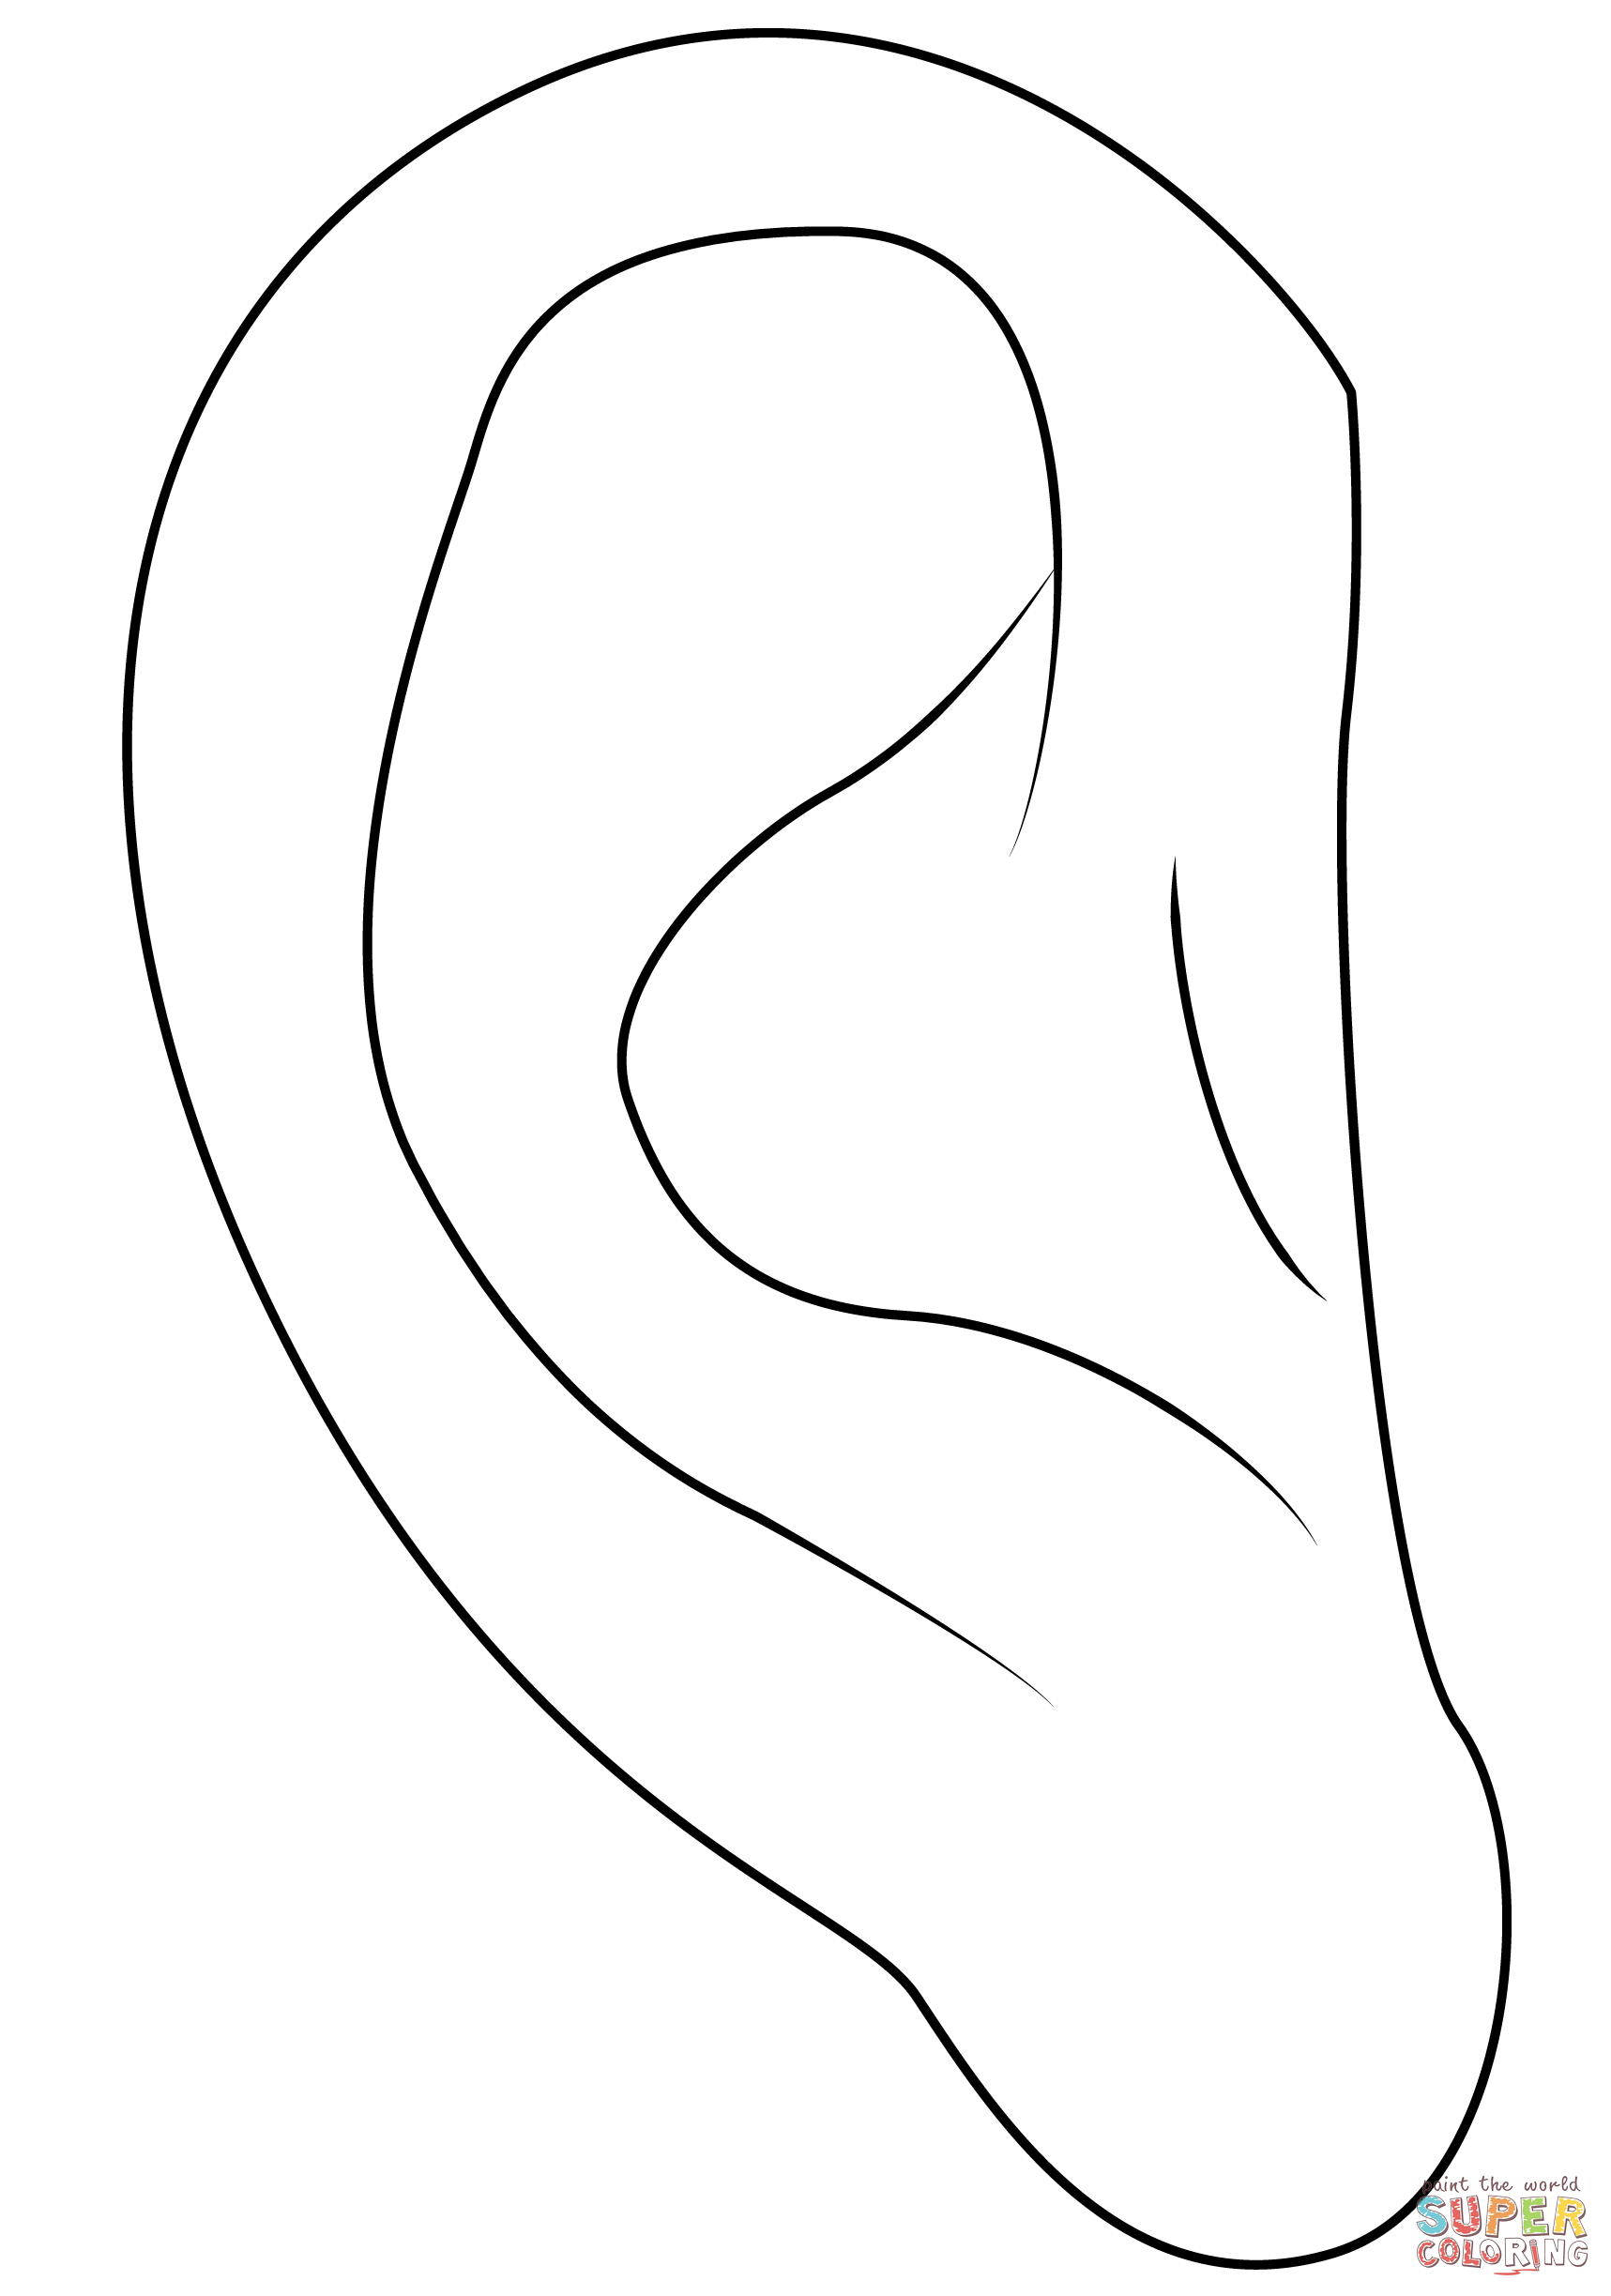 Ear coloring page free printable coloring pages